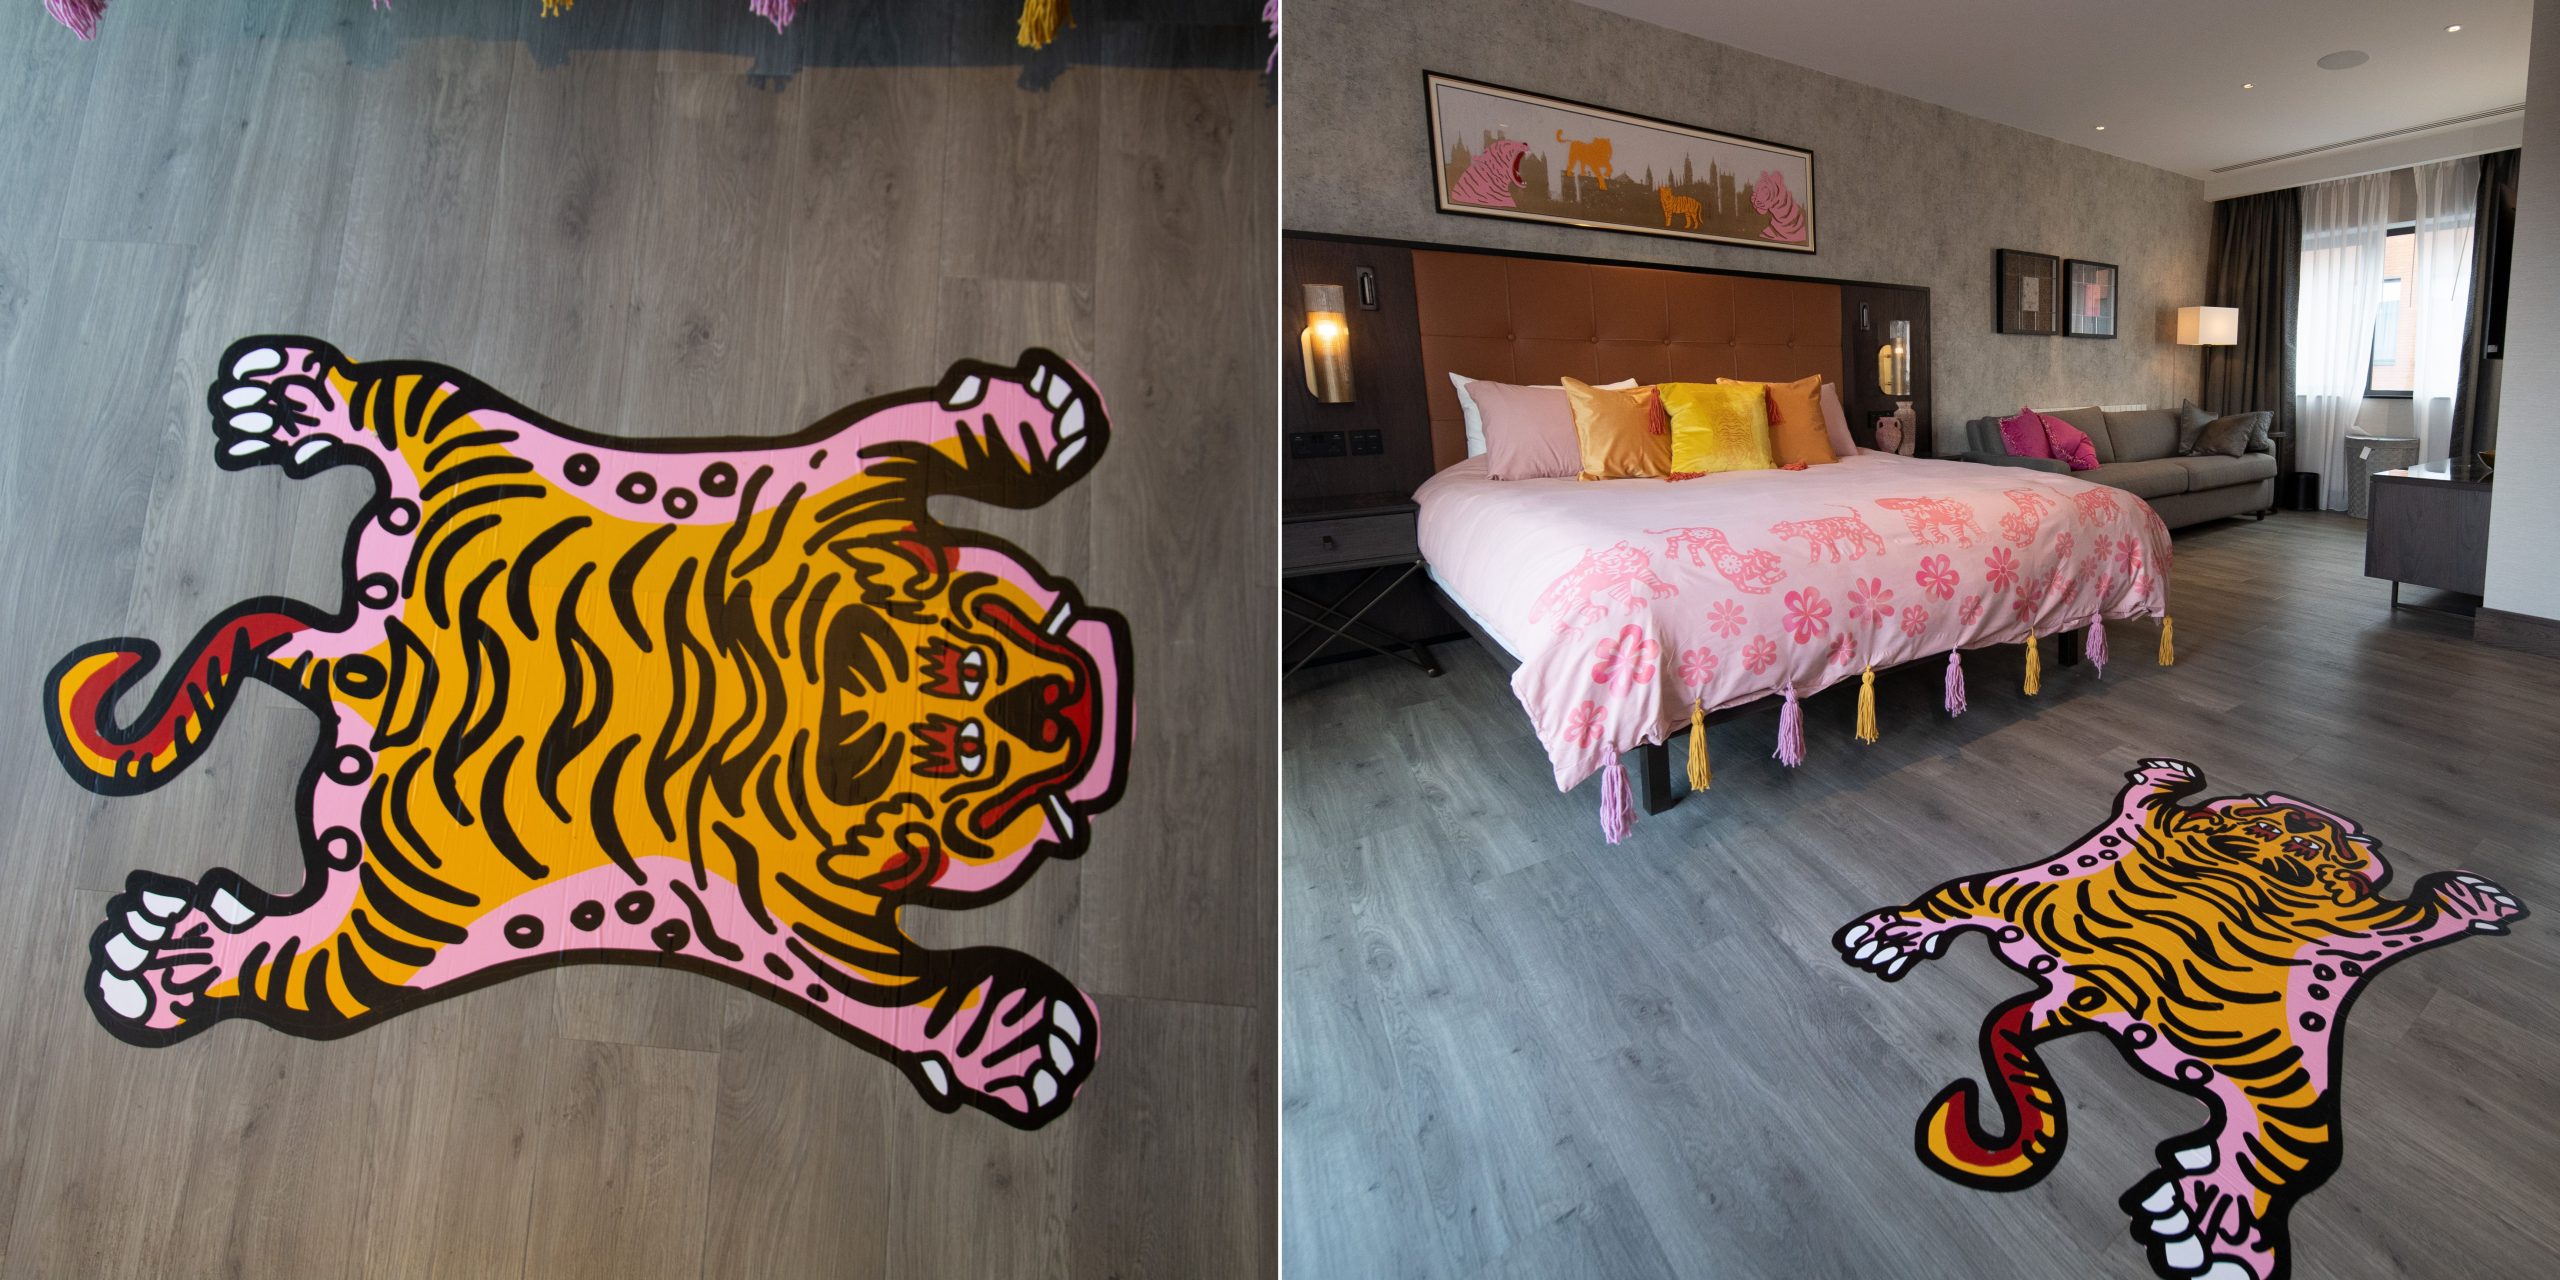 DIY Vinyl Cricut Tiger Rug project for your home